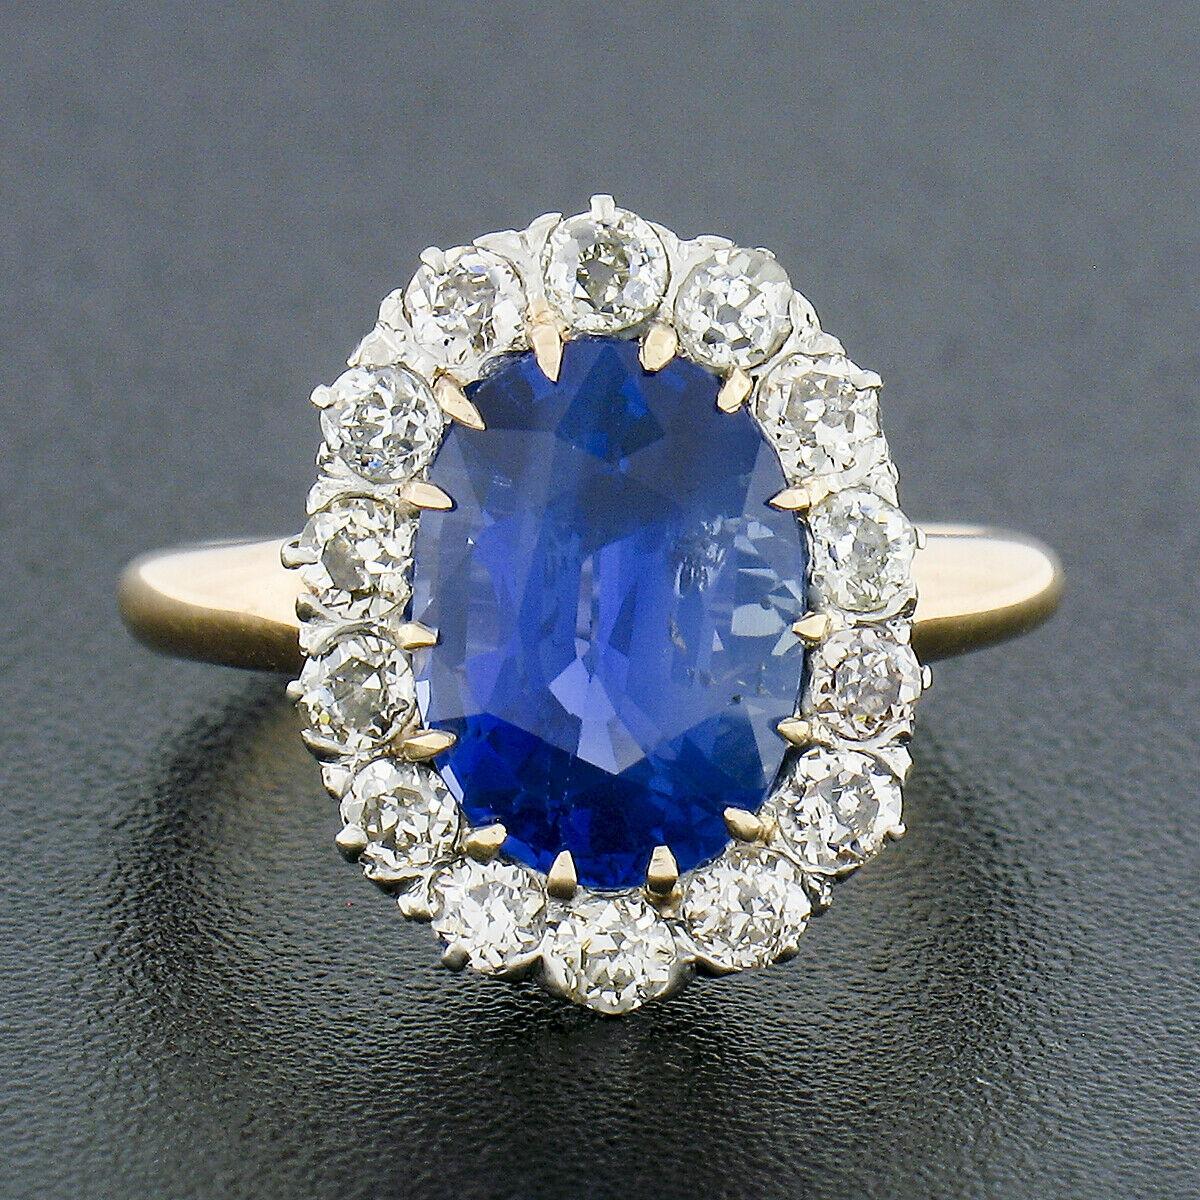 You are looking at a truly breathtaking antique sapphire and diamond 